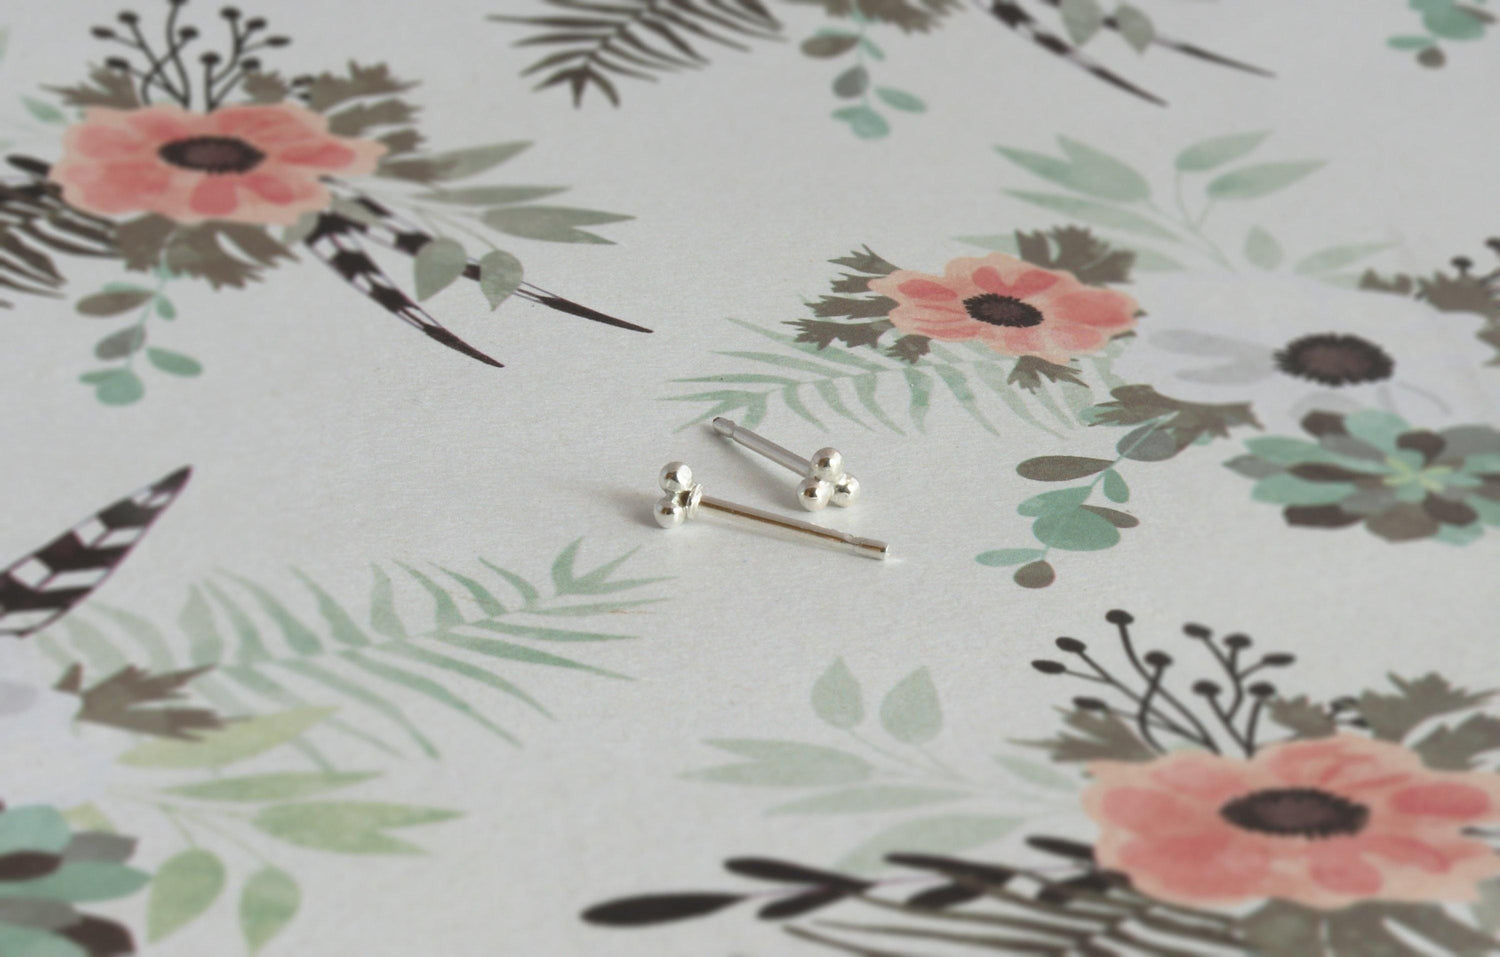 Tiny 3 Ball Studs in Sterling Silver - Sweet November Jewelry